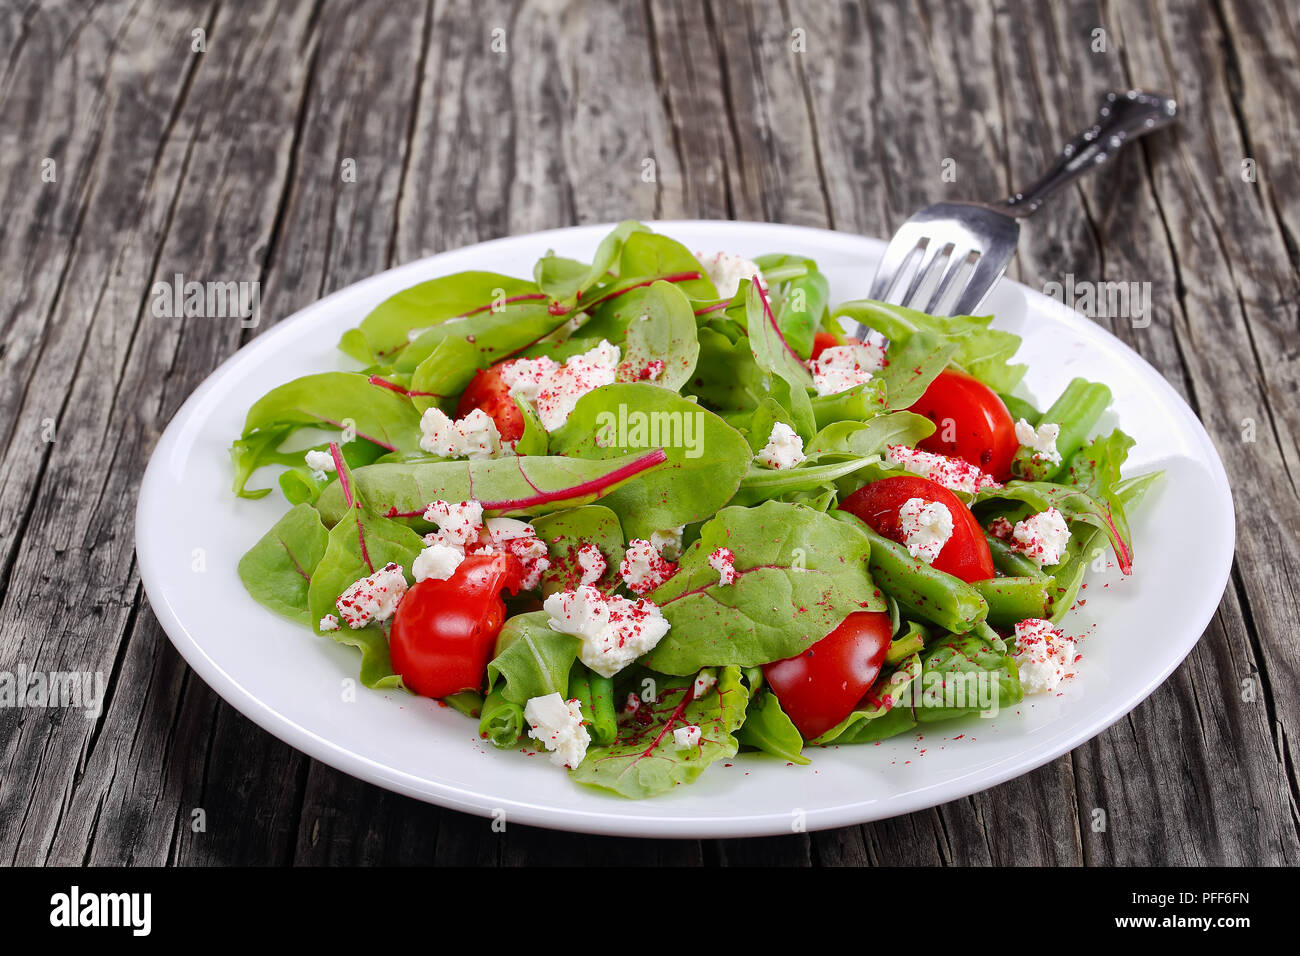 Delicious Healthy Low Calories Salad Of Green Beans Chard